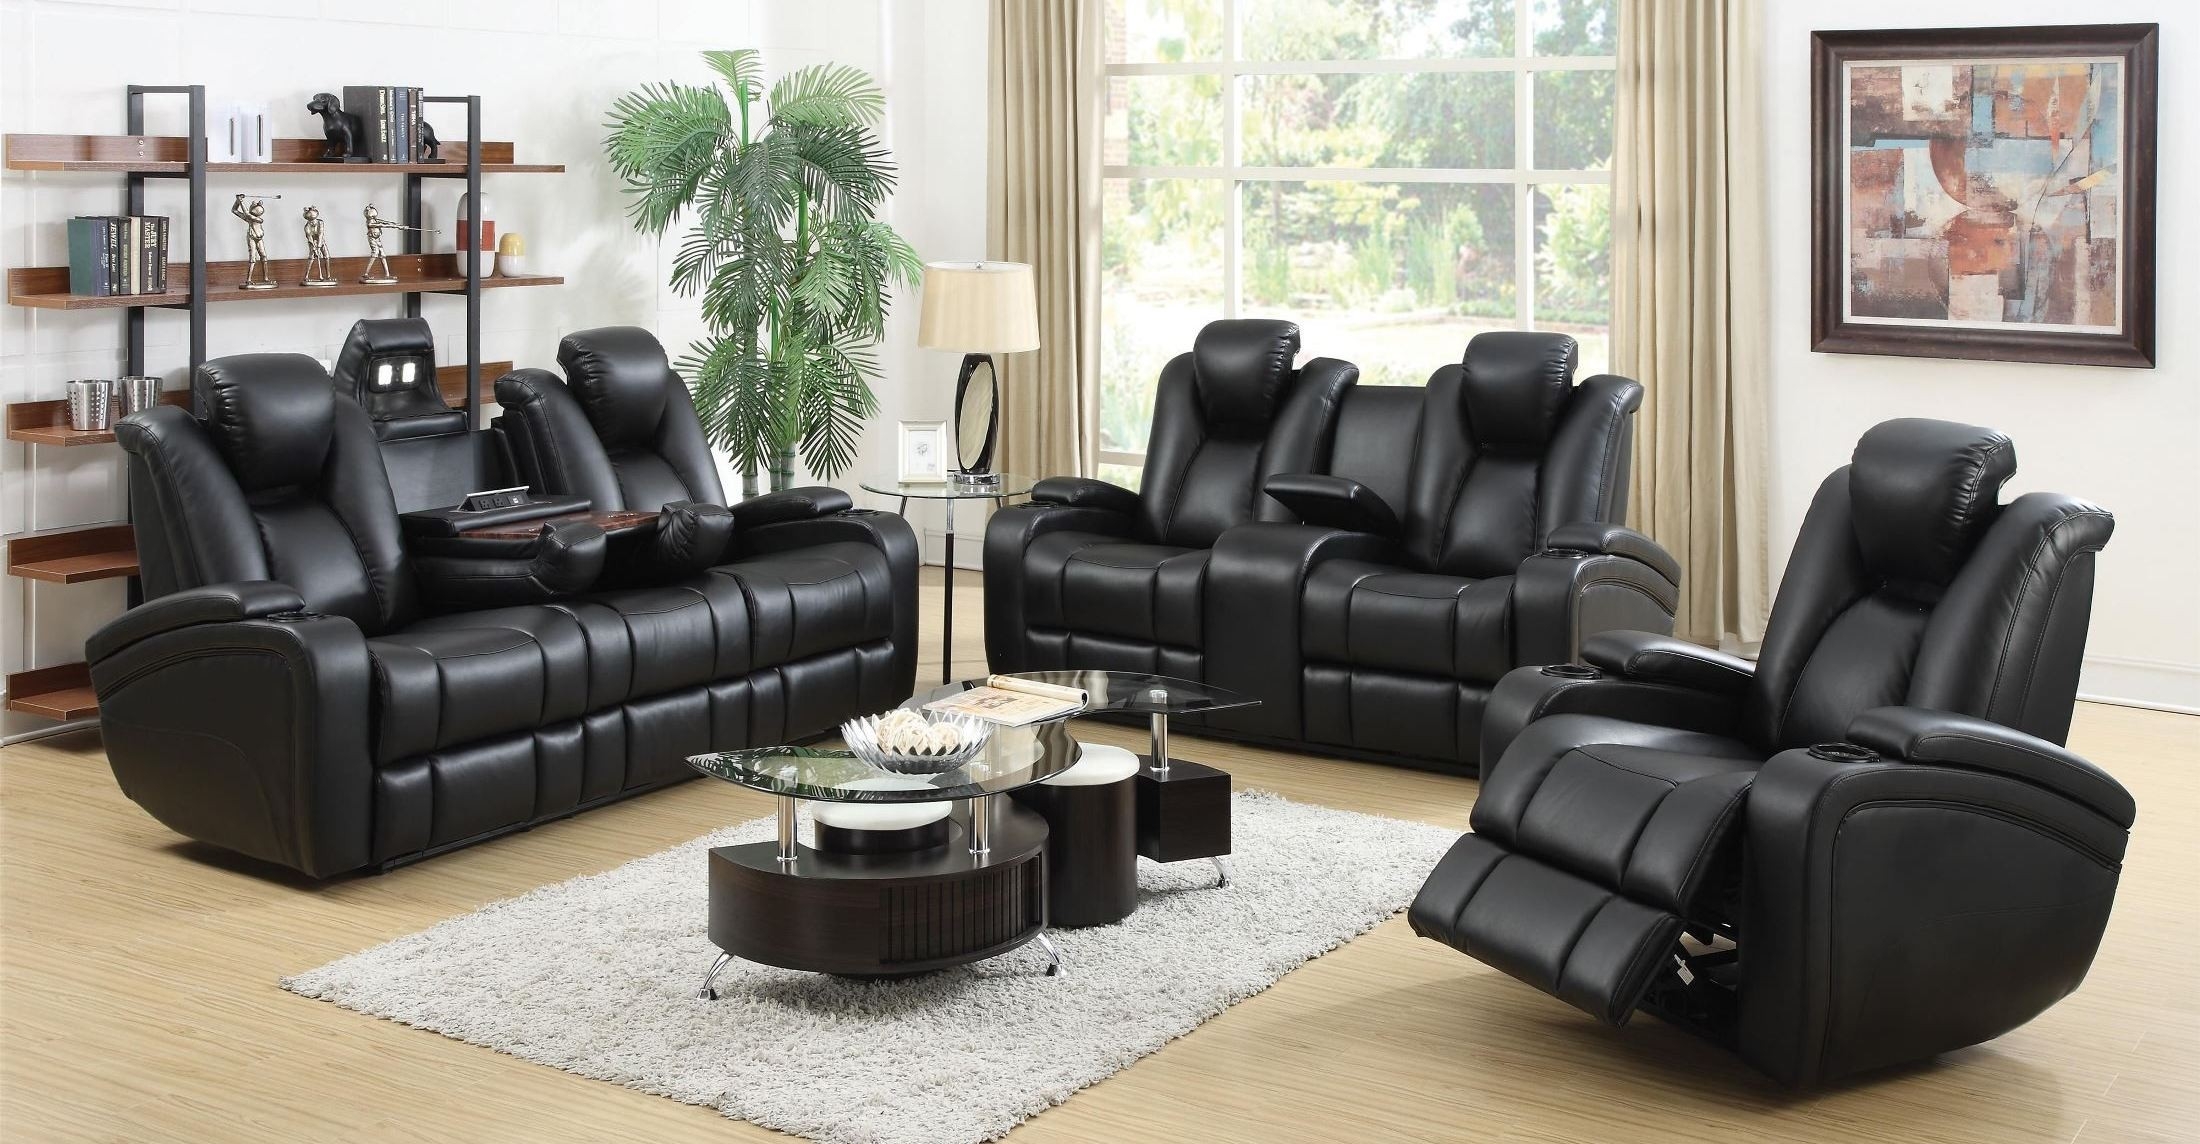 Reclining Sofa With Drop Down Table, Leather Couch Loveseat Recliner Set